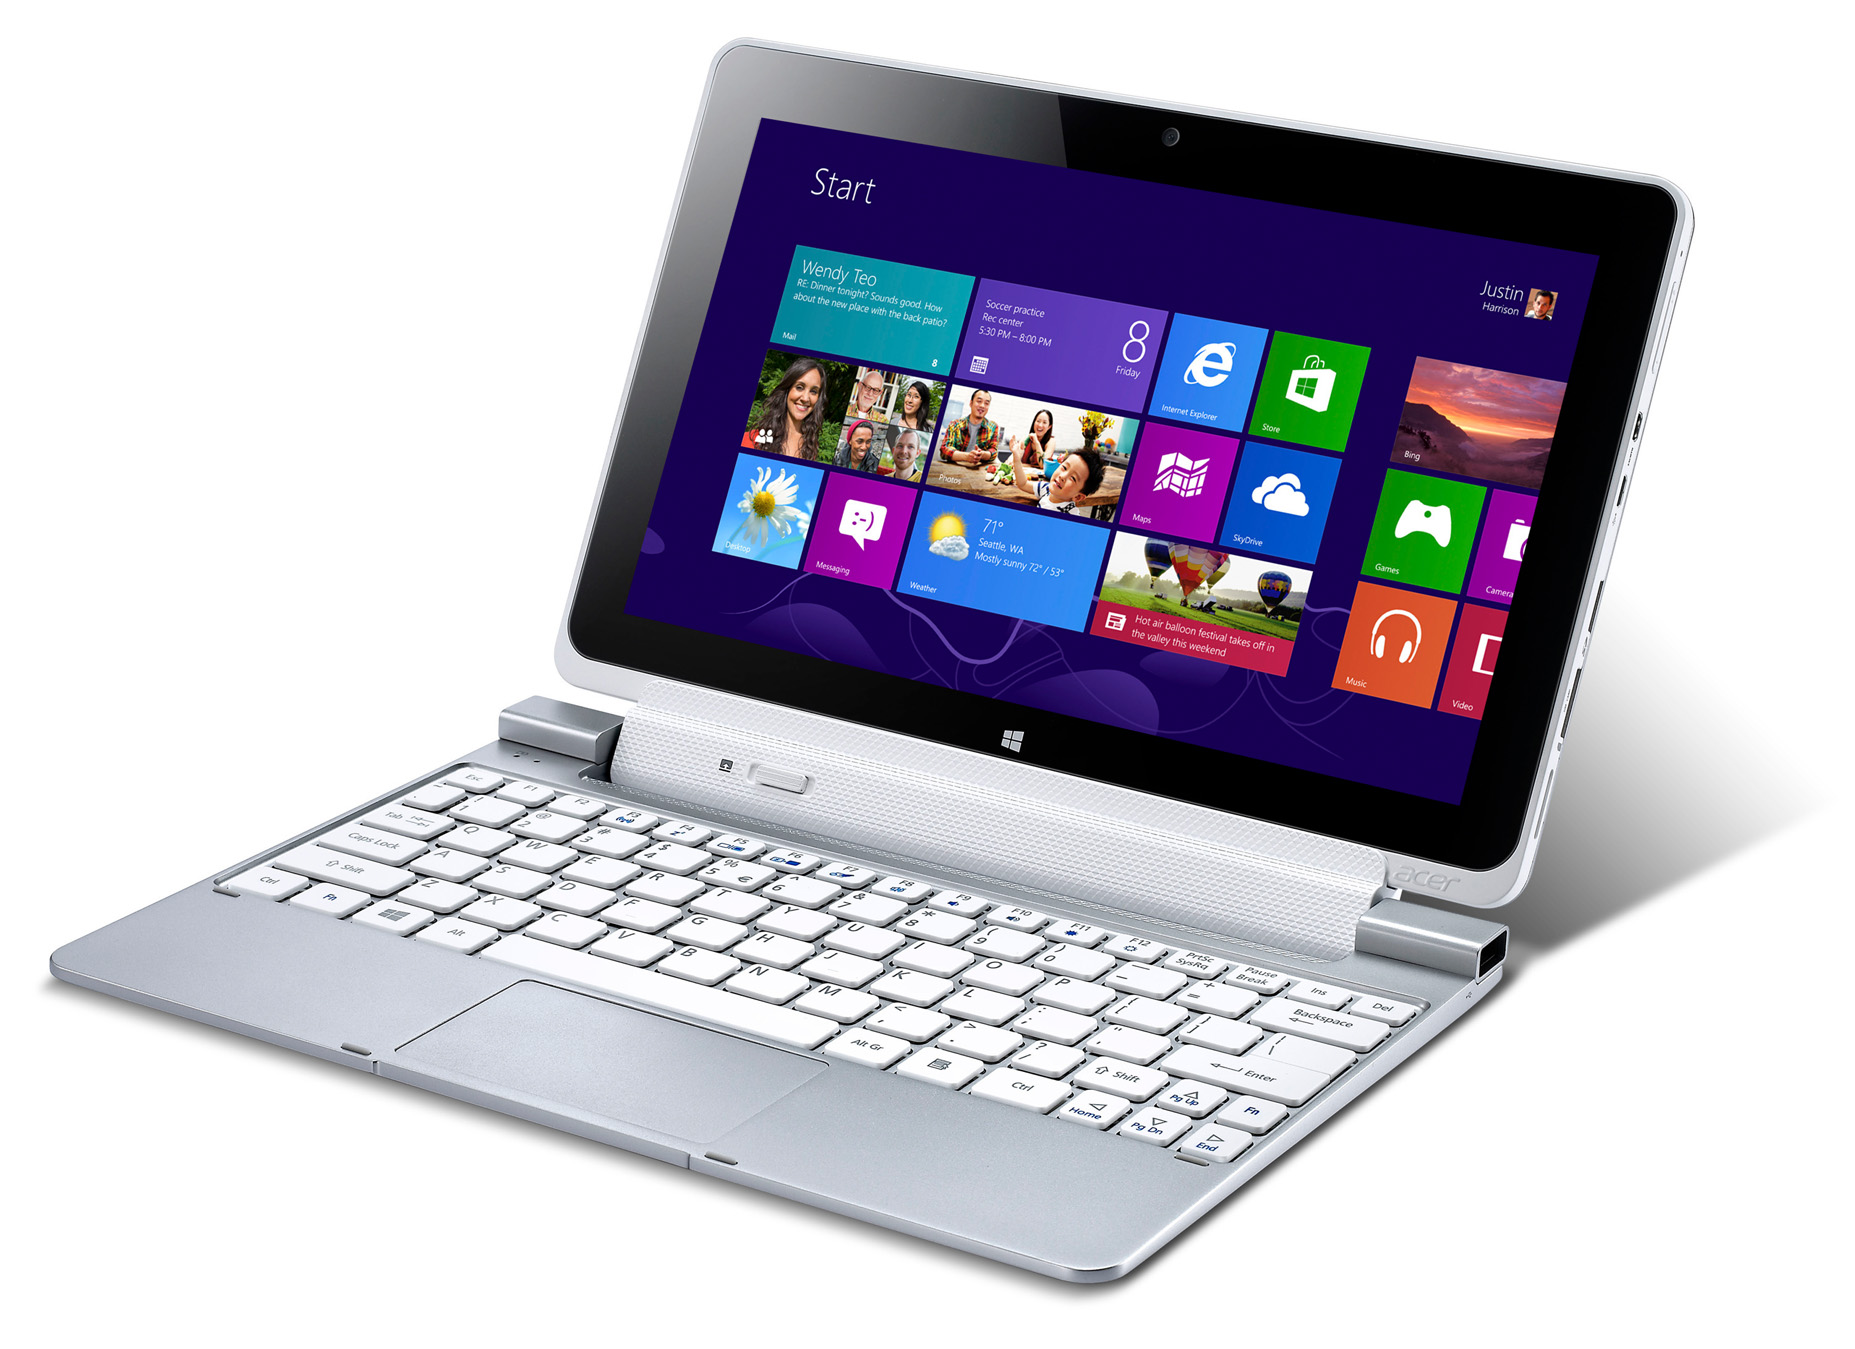 Jual Harga Acer Iconia W511 Tablet Windows 8 3g